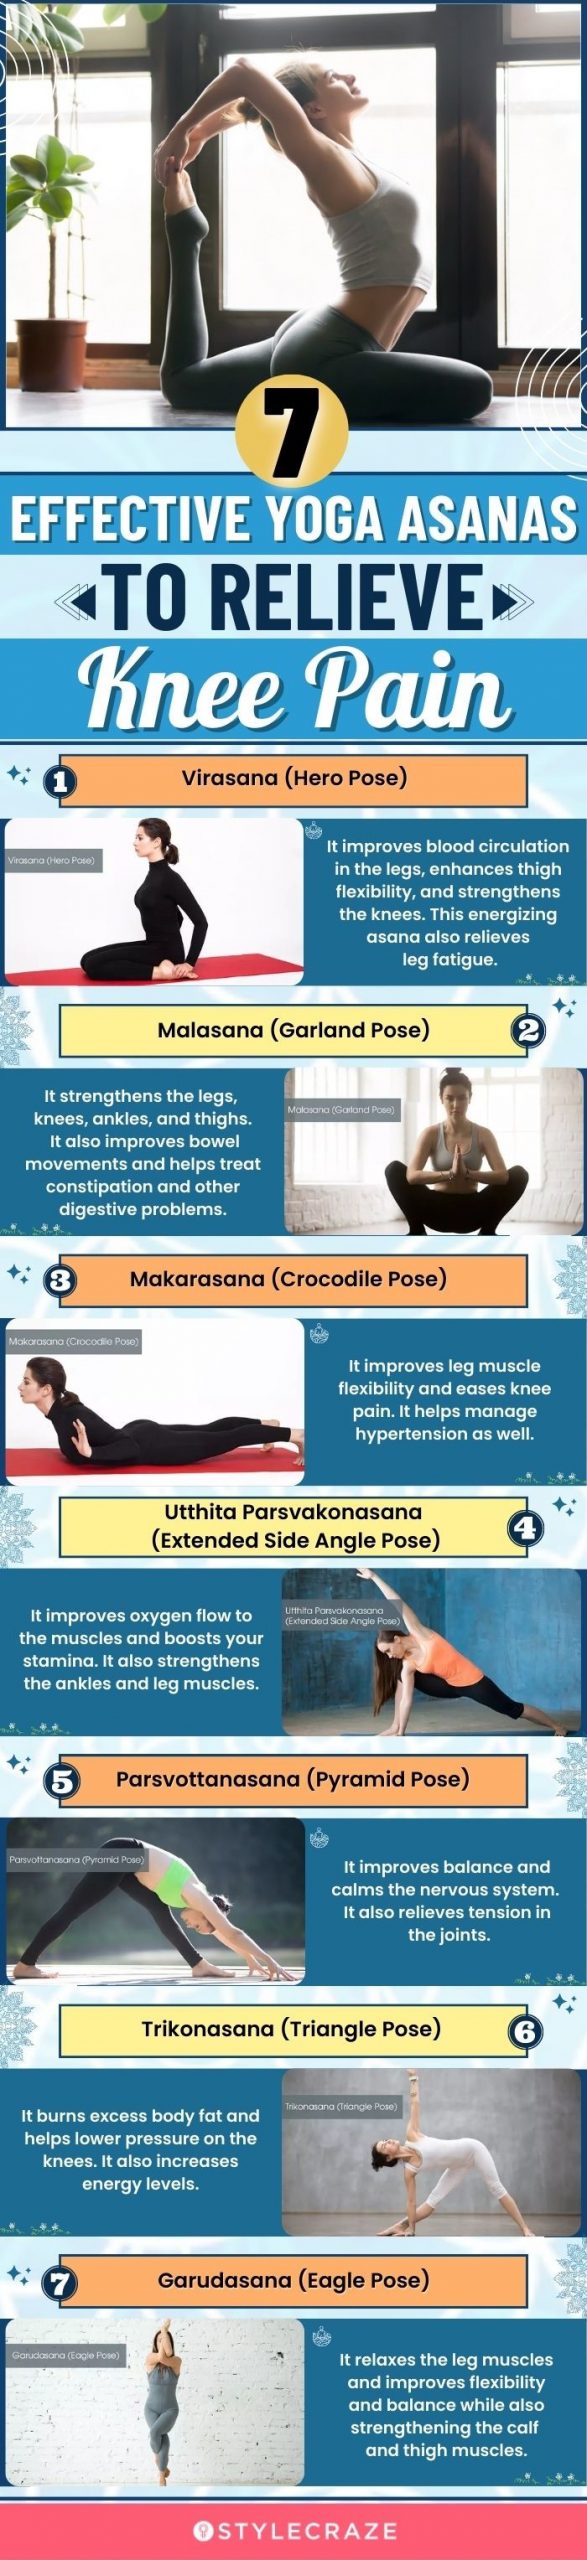 Free Download Yoga Asanas PowerPoint (Ppt) Presentation for Everyday Health